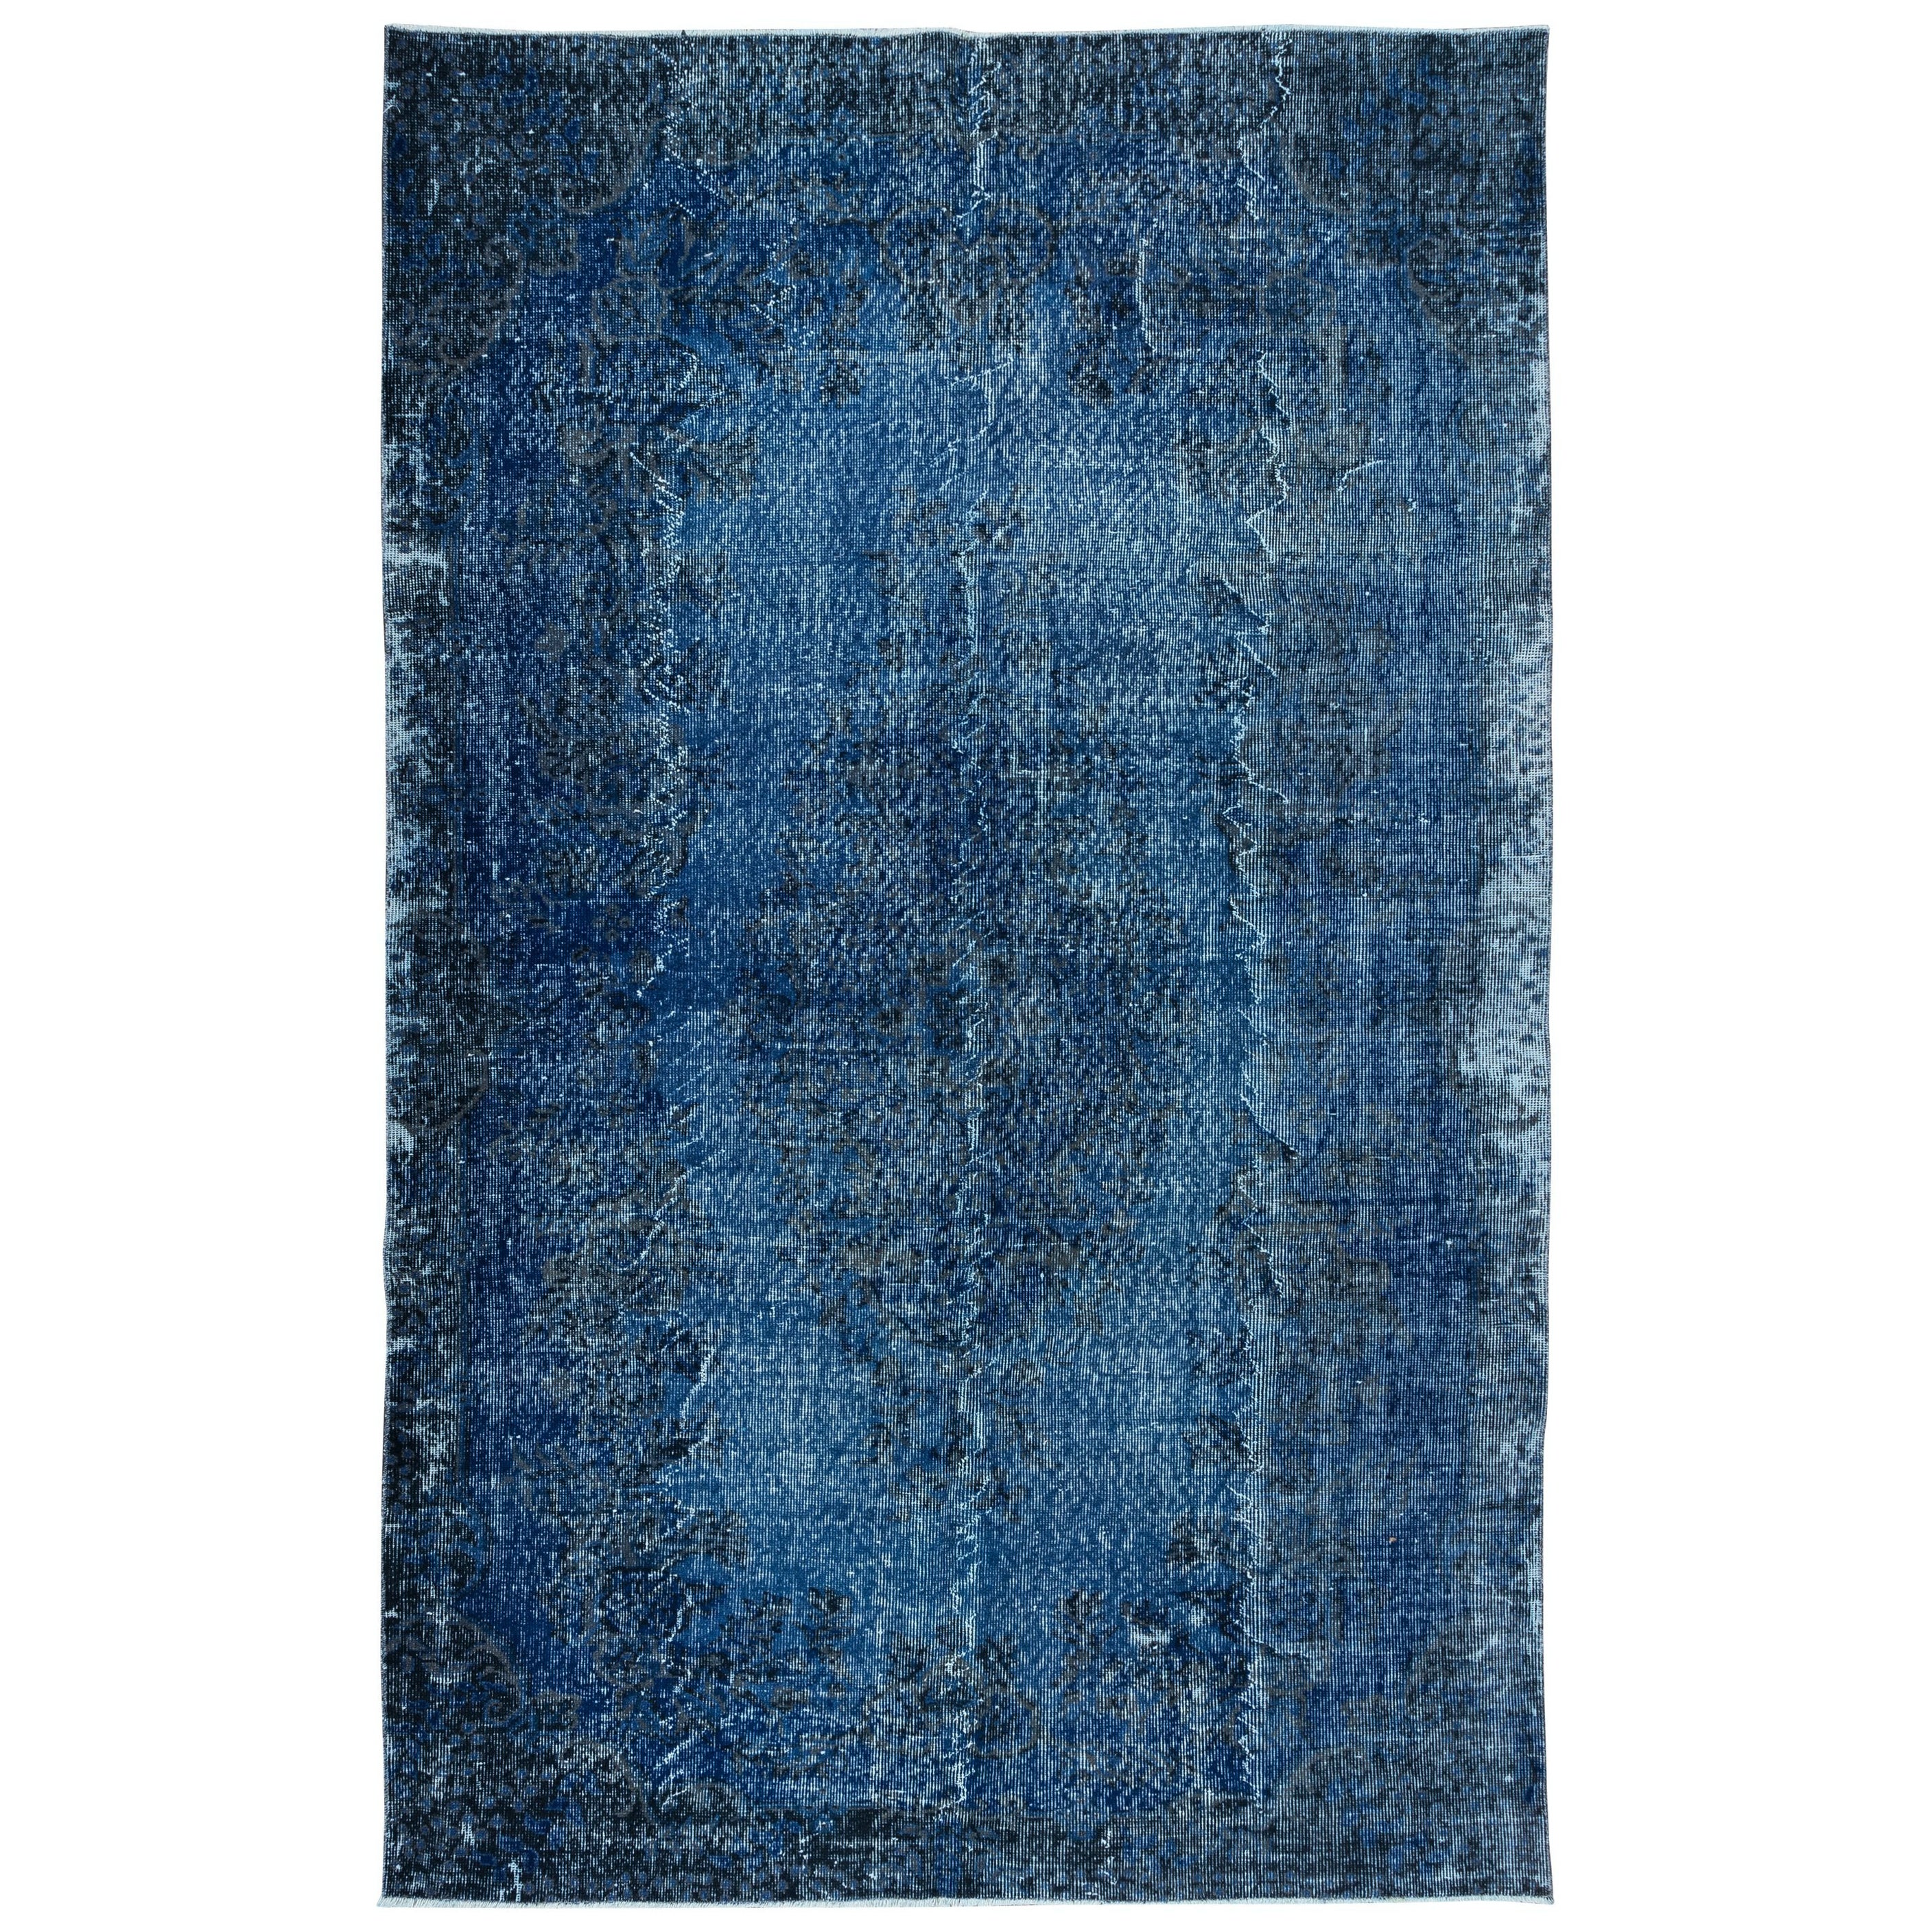 5.7x9 Ft Contemporary Overdyed Hand Knotted Wool Blue Area Rug from Turkey For Sale